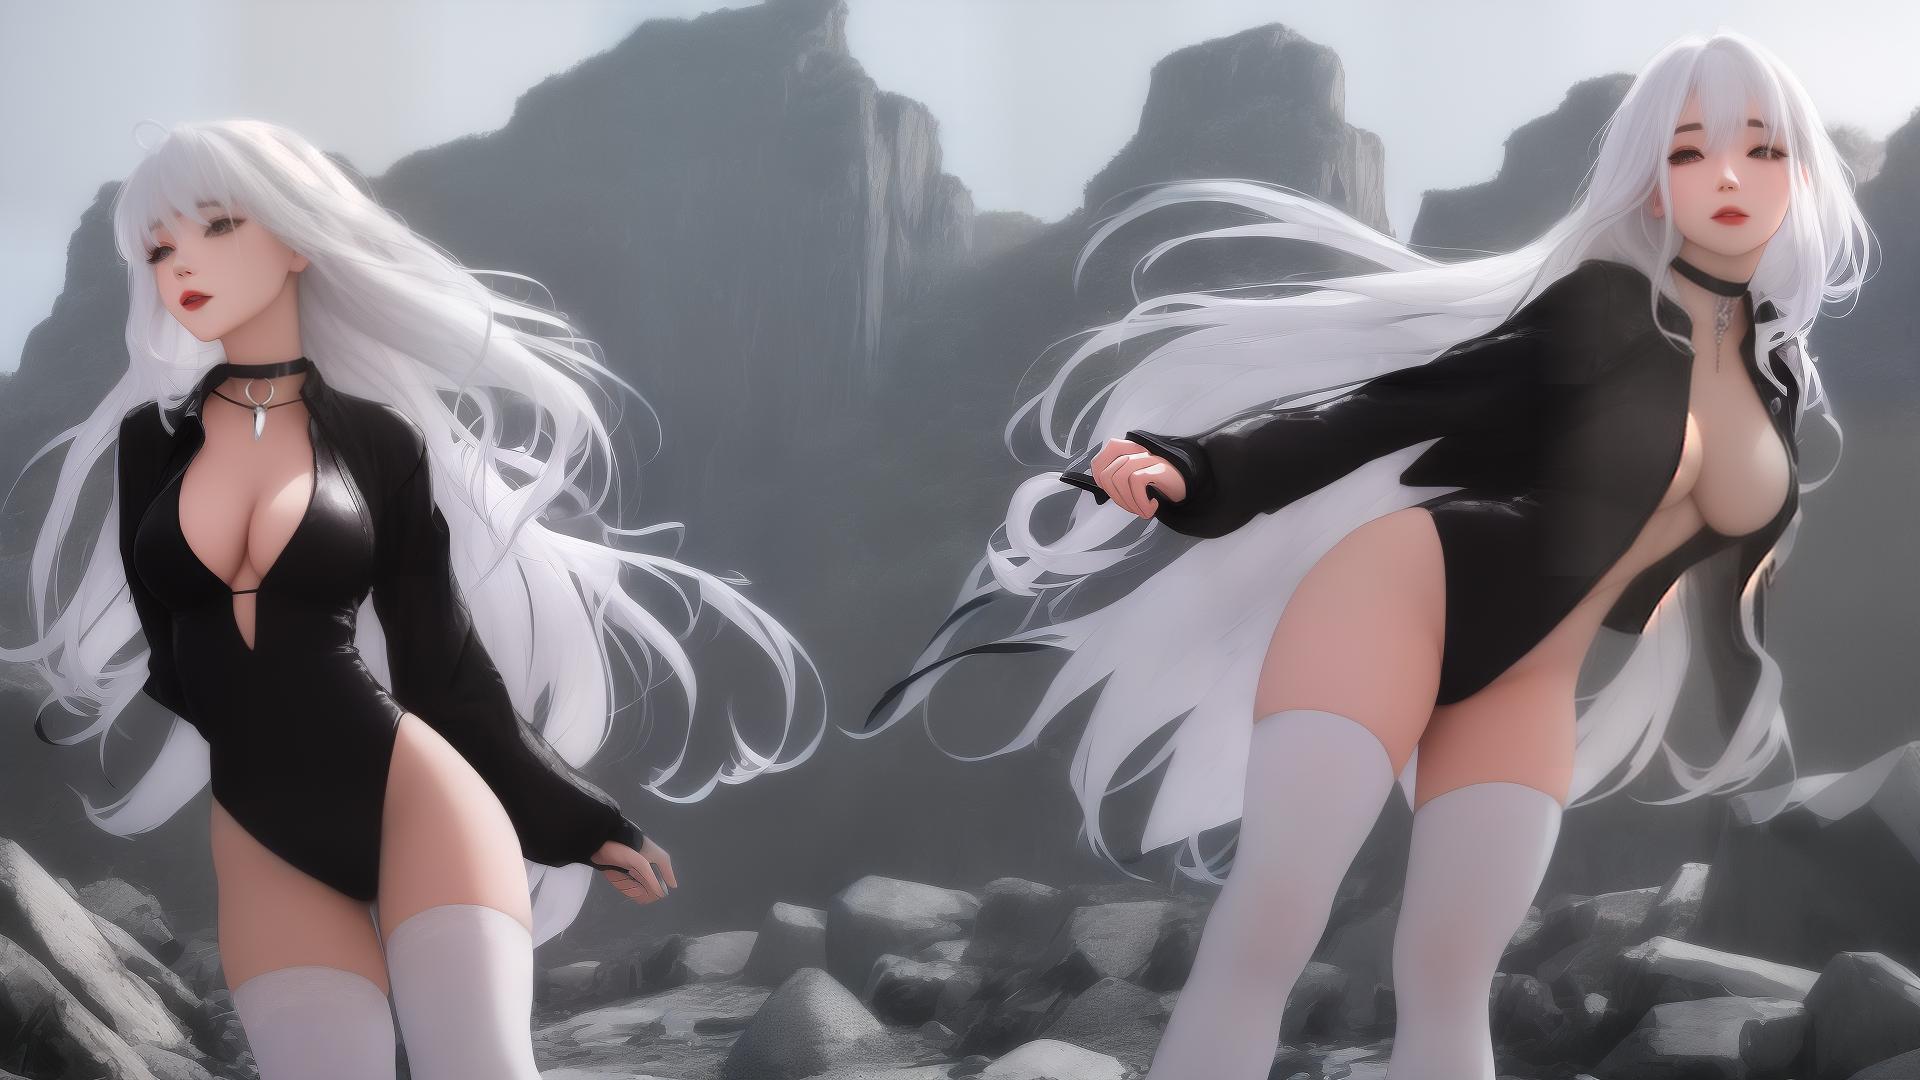  masterpiece, best quality, solo,female,boobs,thigh highs,landscape,white hair,long hair,black outfit,choker around neck,winter